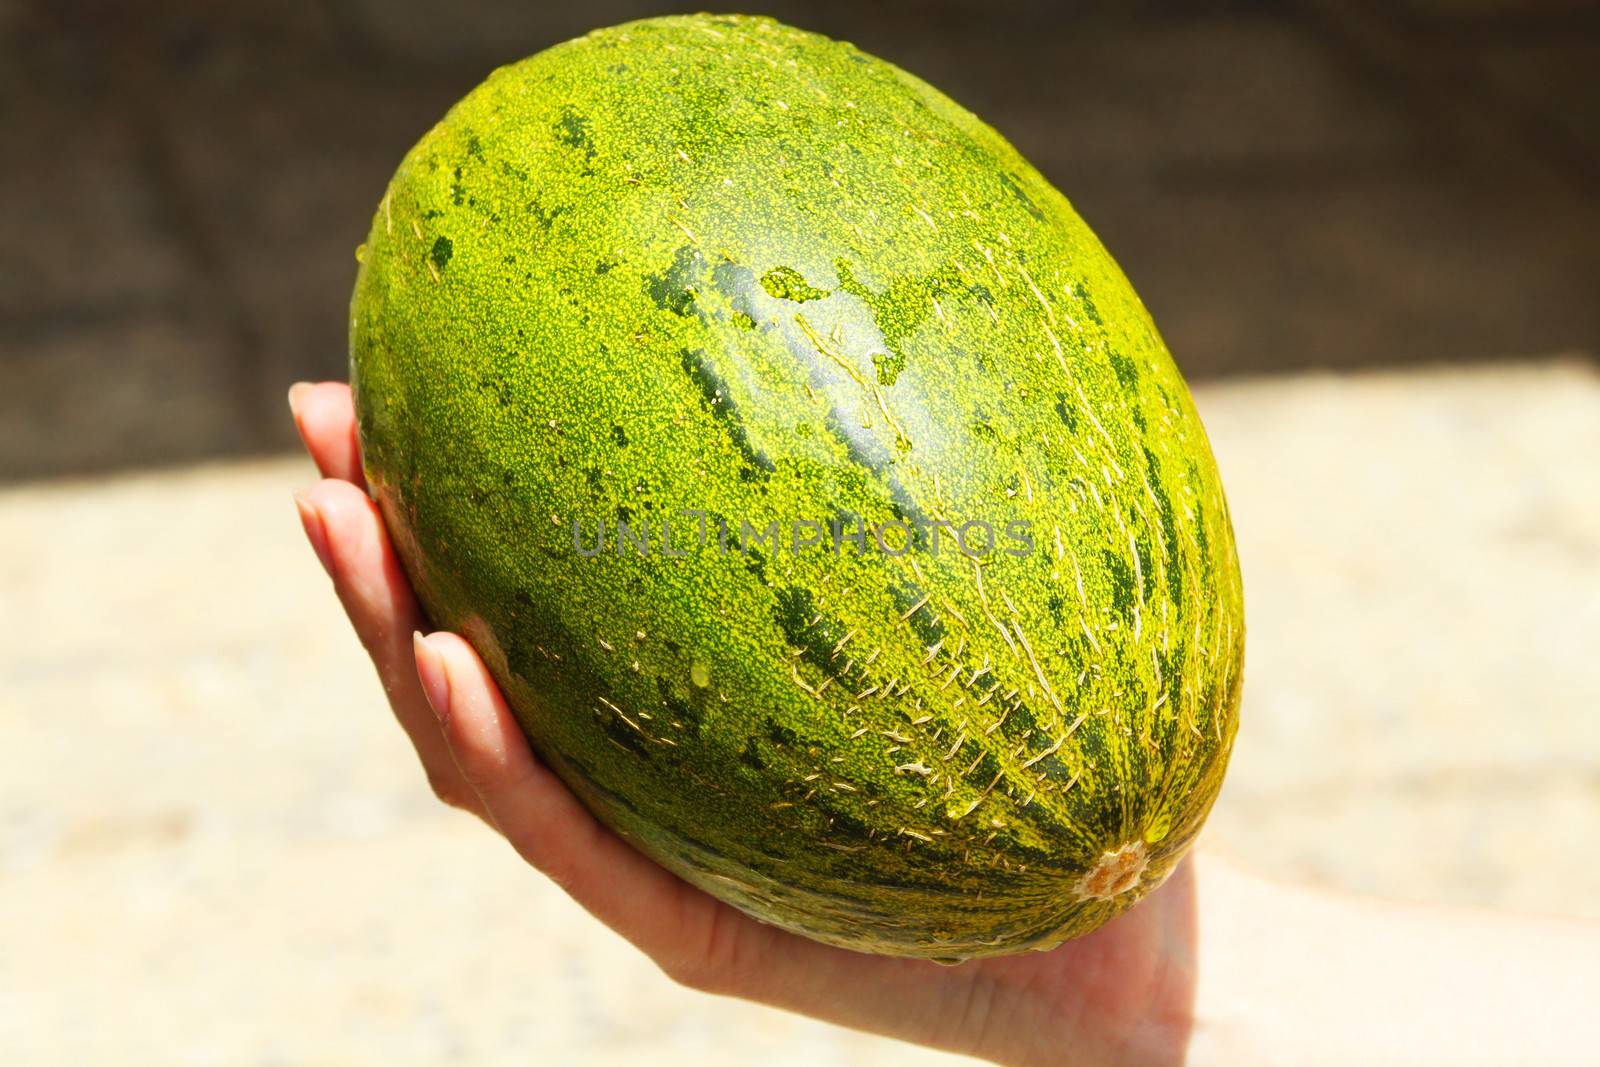 A green melon in the girl's hand
